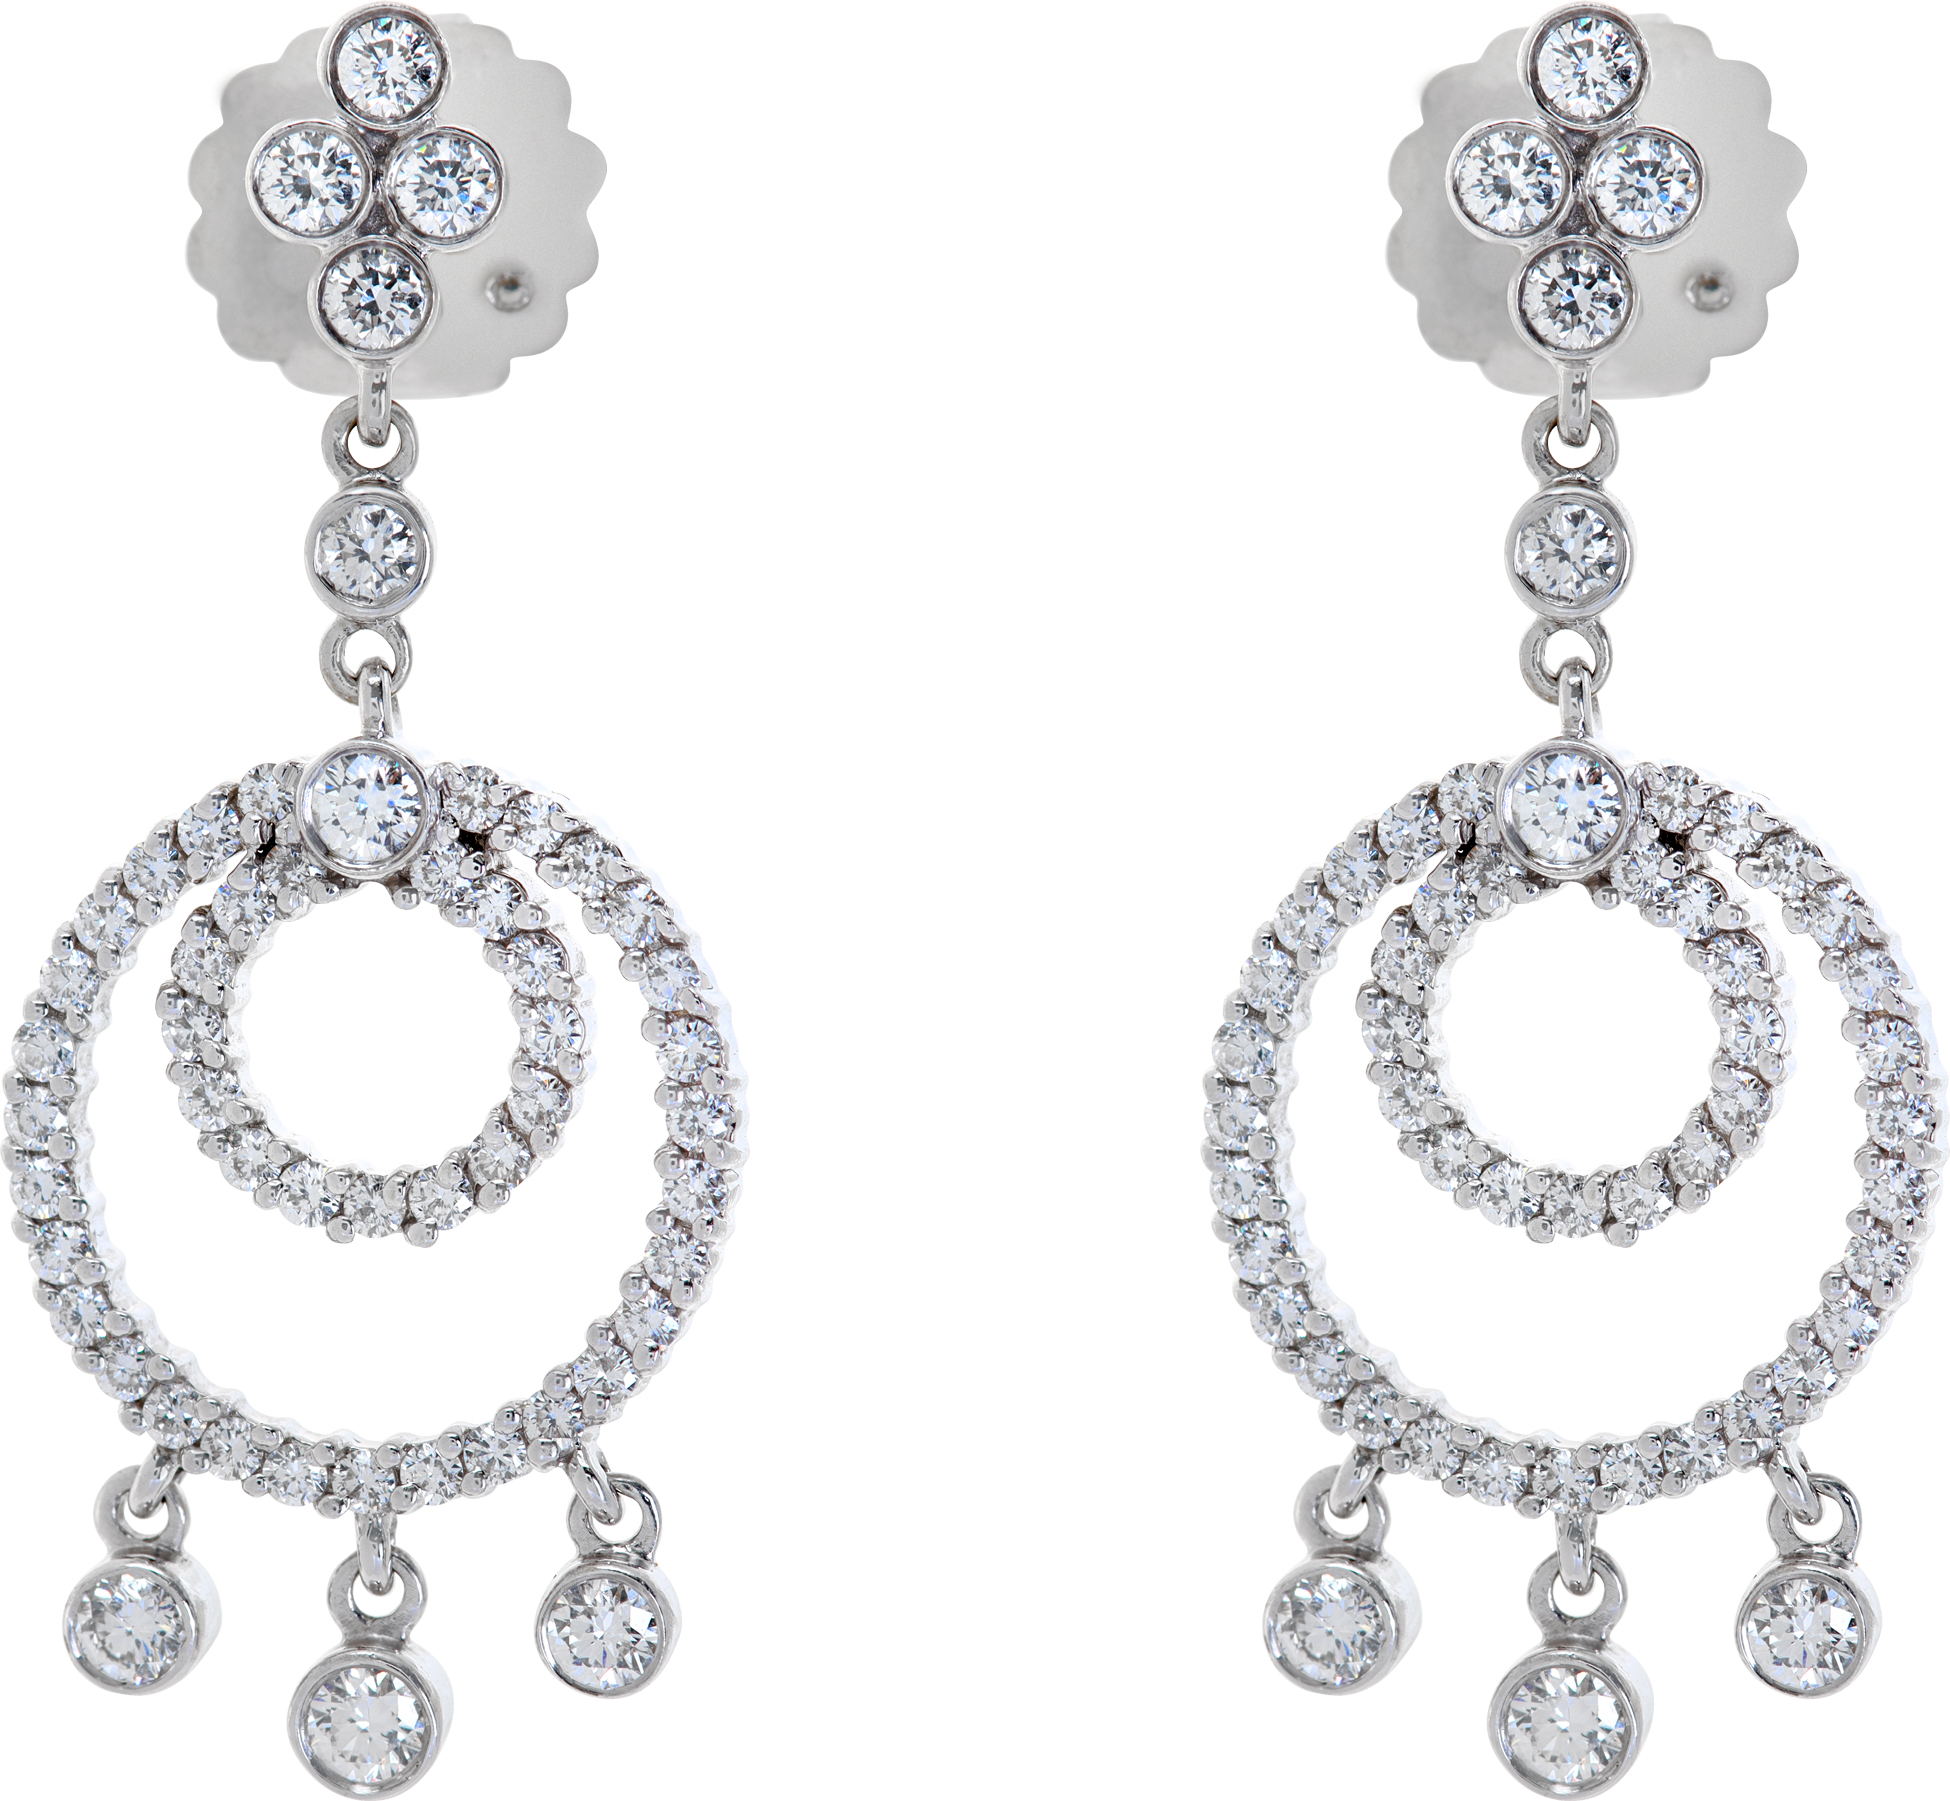 Dangling diamond earrings in 18k white gold with approximately 1.7 carats in round diamonds (G-H color, SI clarity). (Stones)